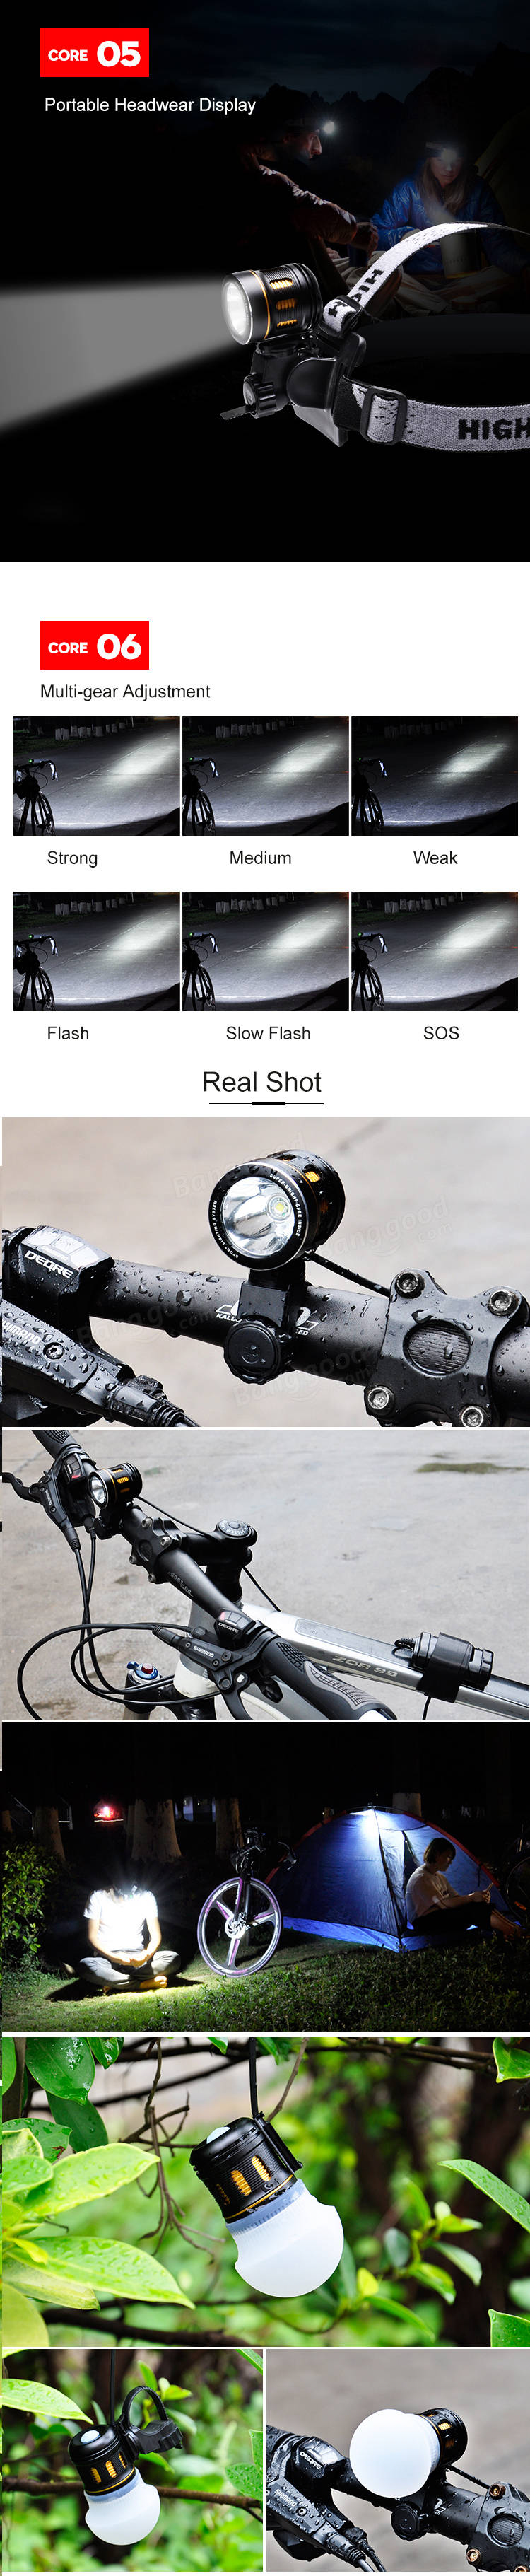 XANES 1000LM T6 Bicycle Front Light IP65 120° Wide Angle with Lampshade HeadLamp